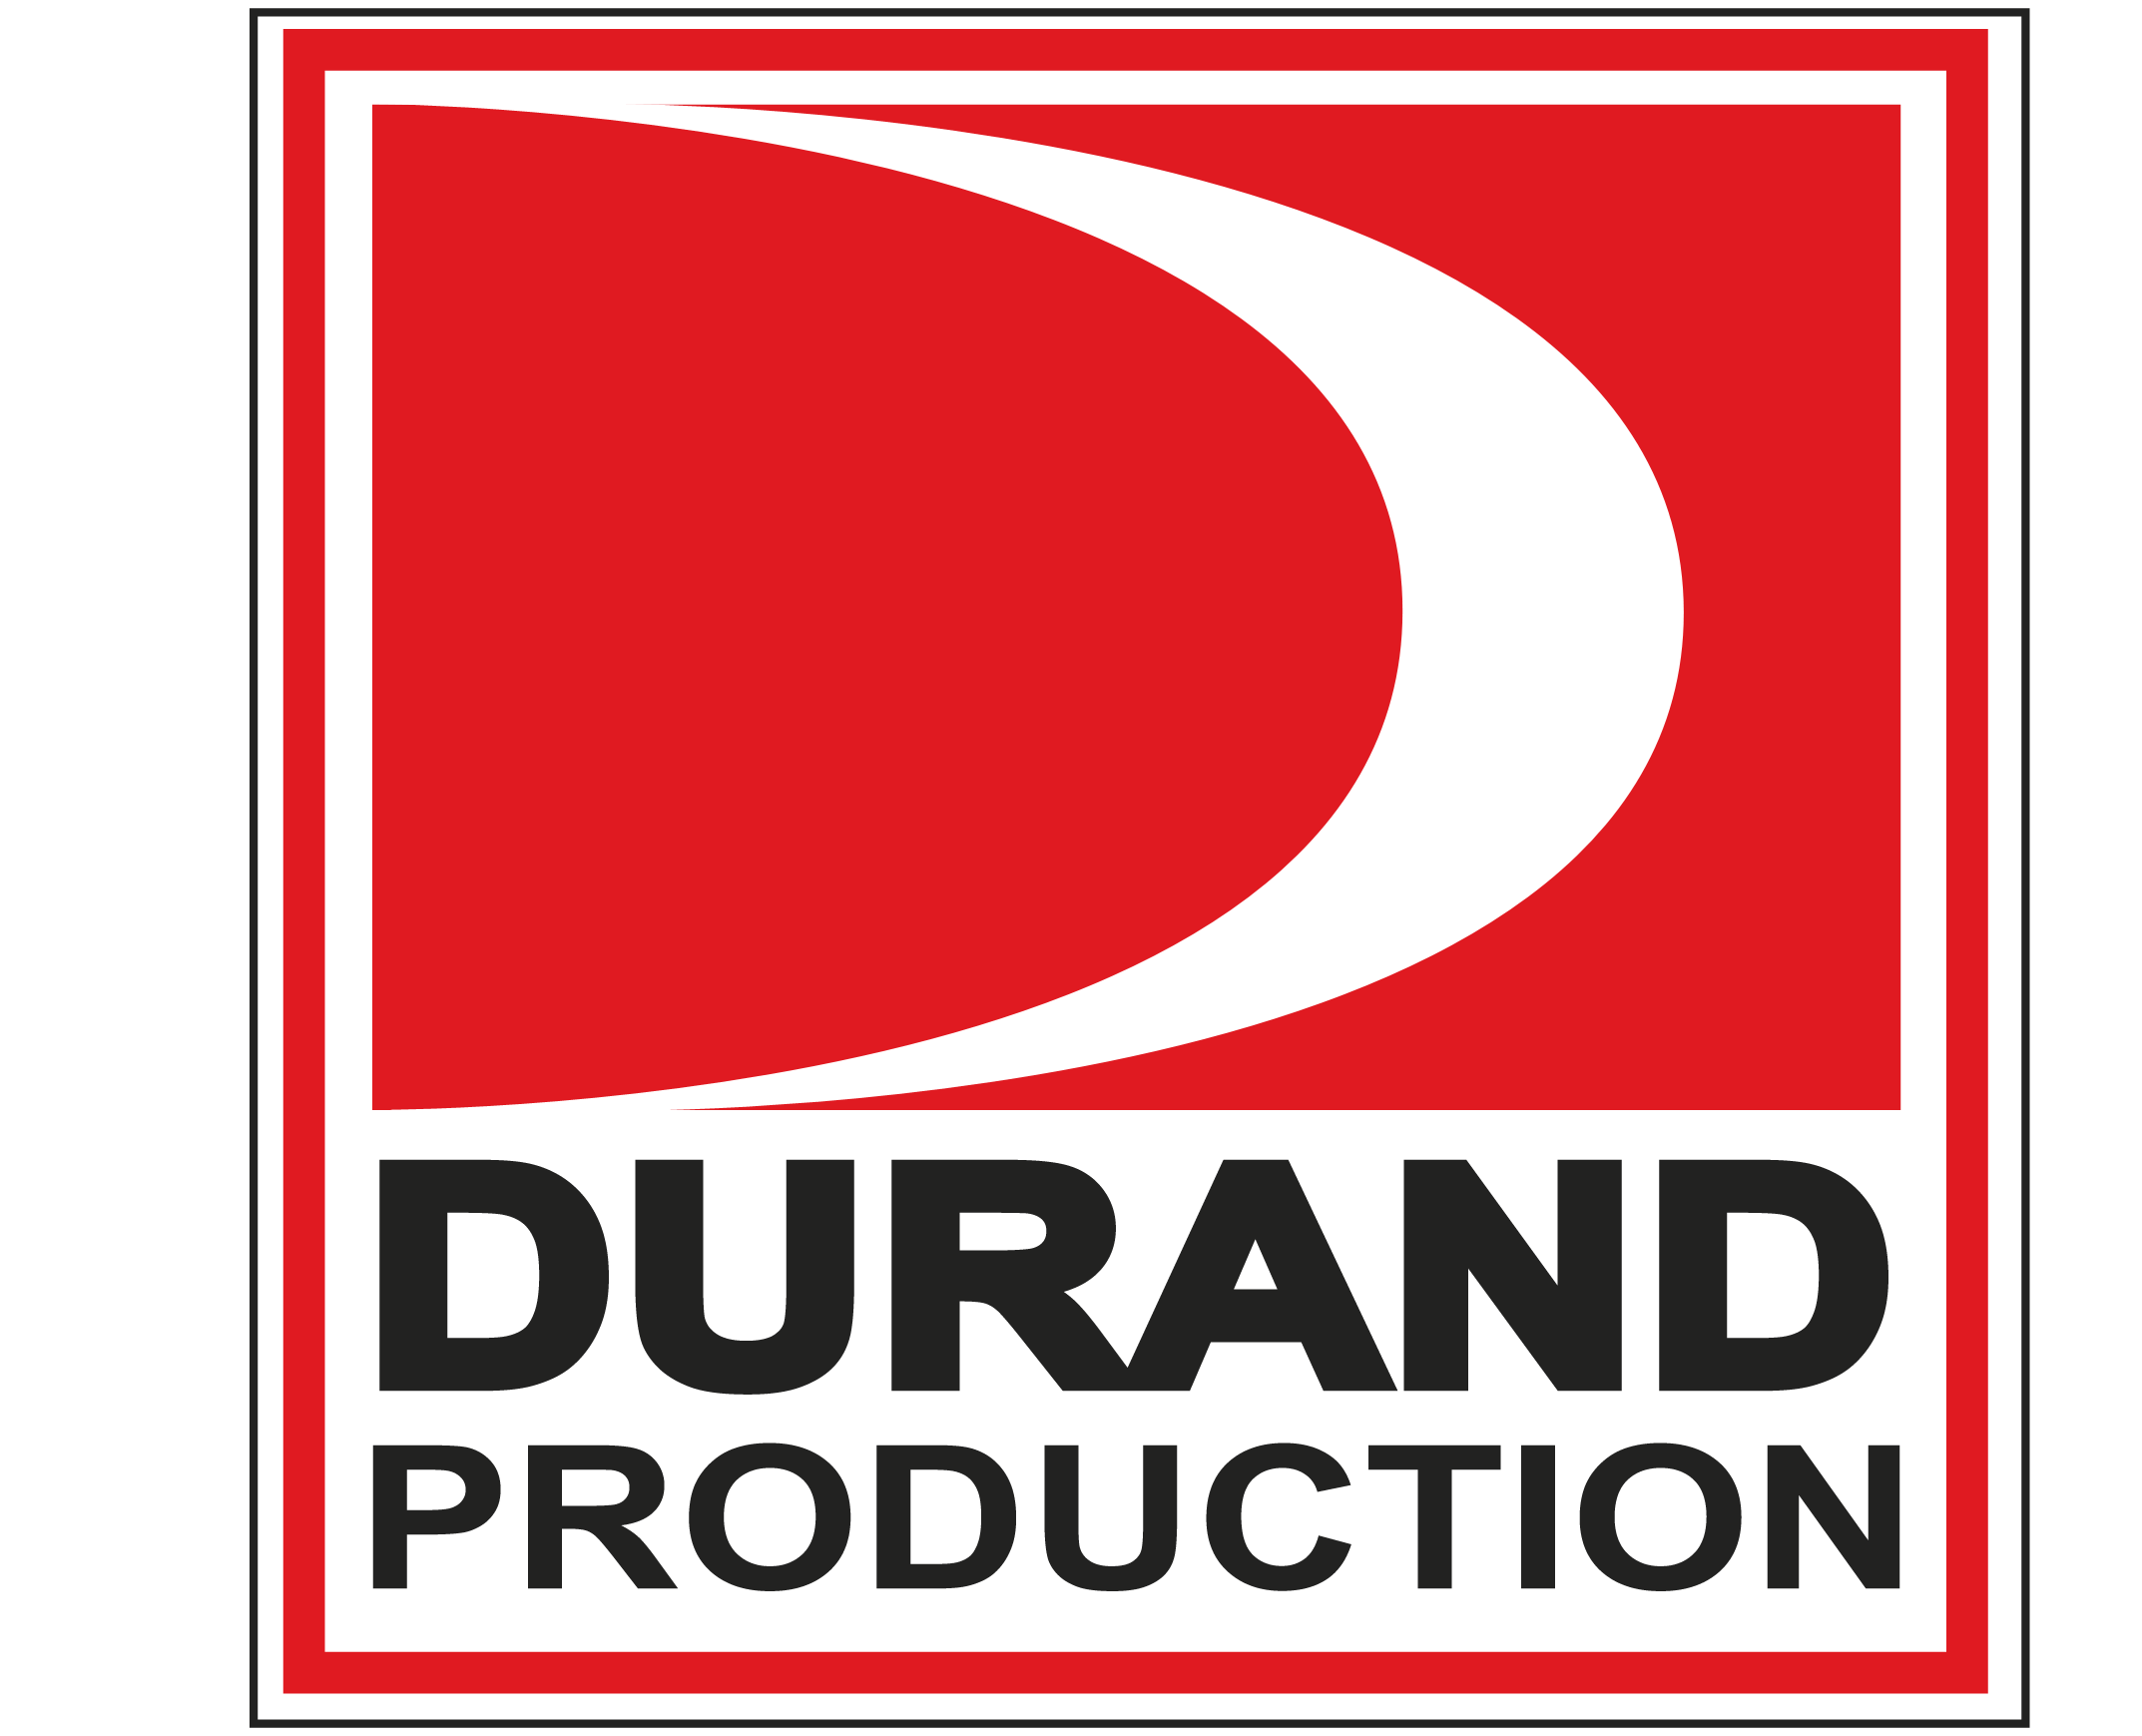 DURAND PRODUCTION